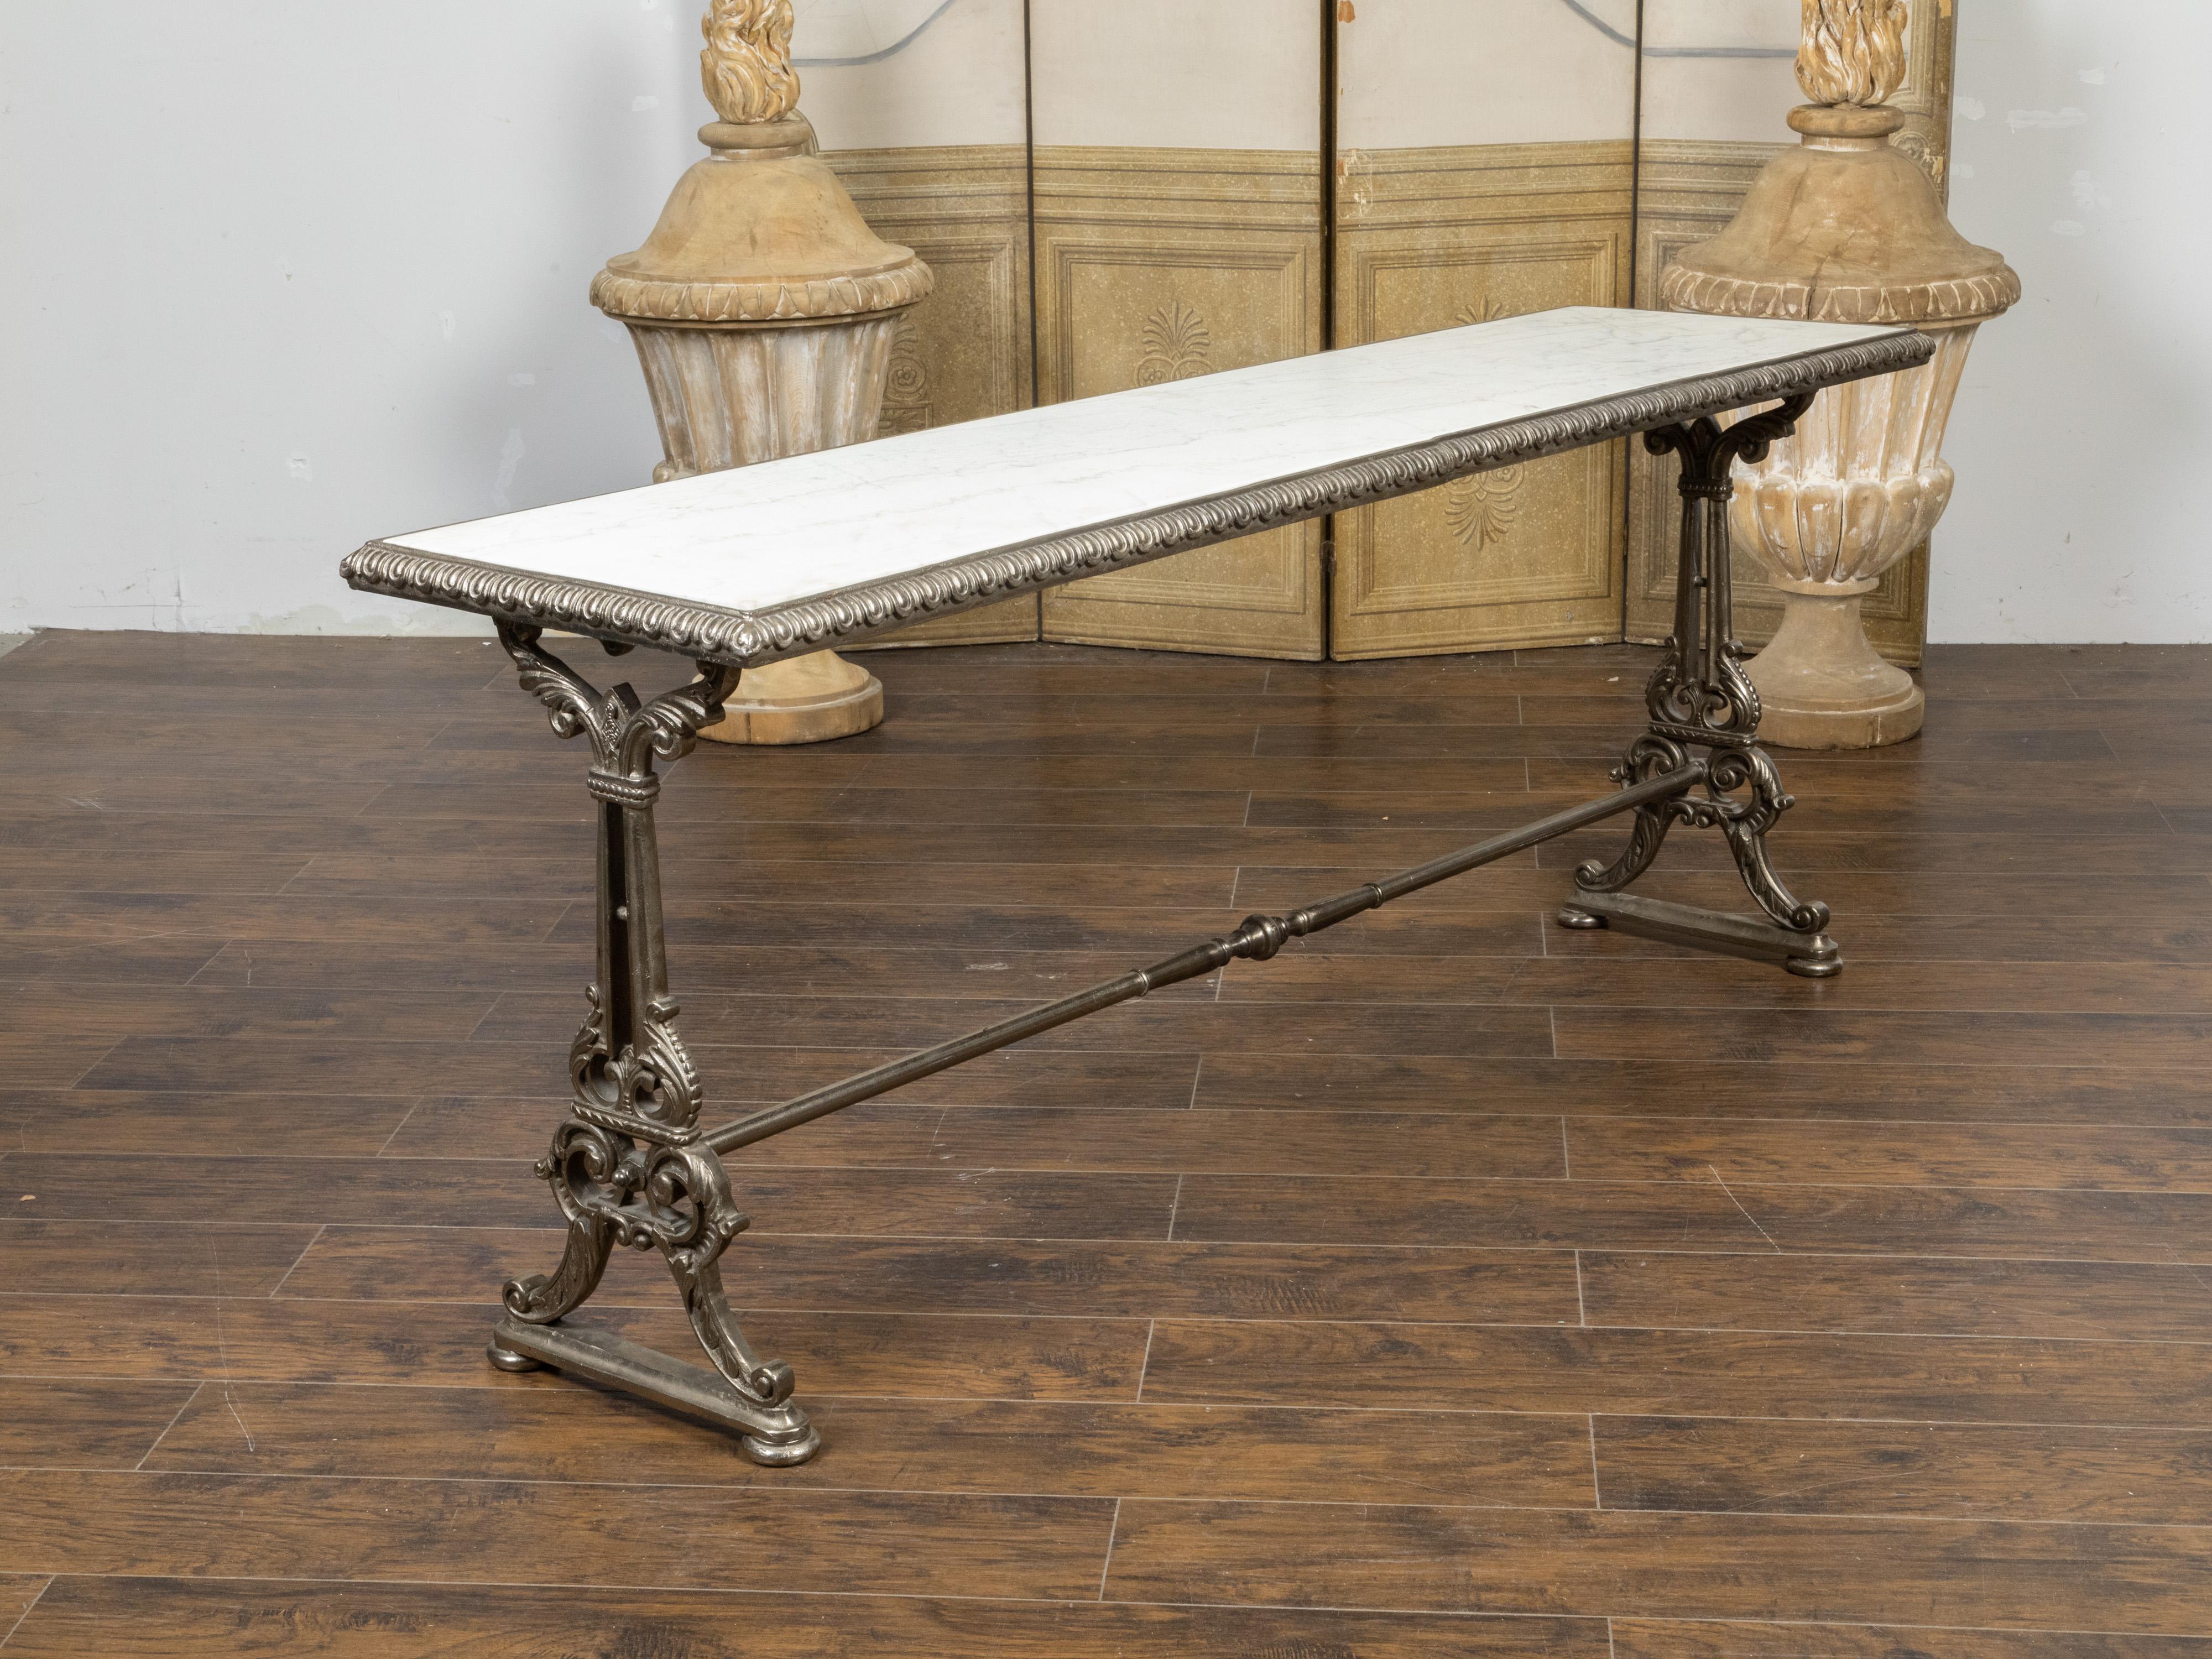 A French cast iron pastry console table from the 19th century, with white marble top, decorative motifs on the edges and trestle base accented with scrolling foliage. Created in France during the 19th century, this long and narrow pastry table will